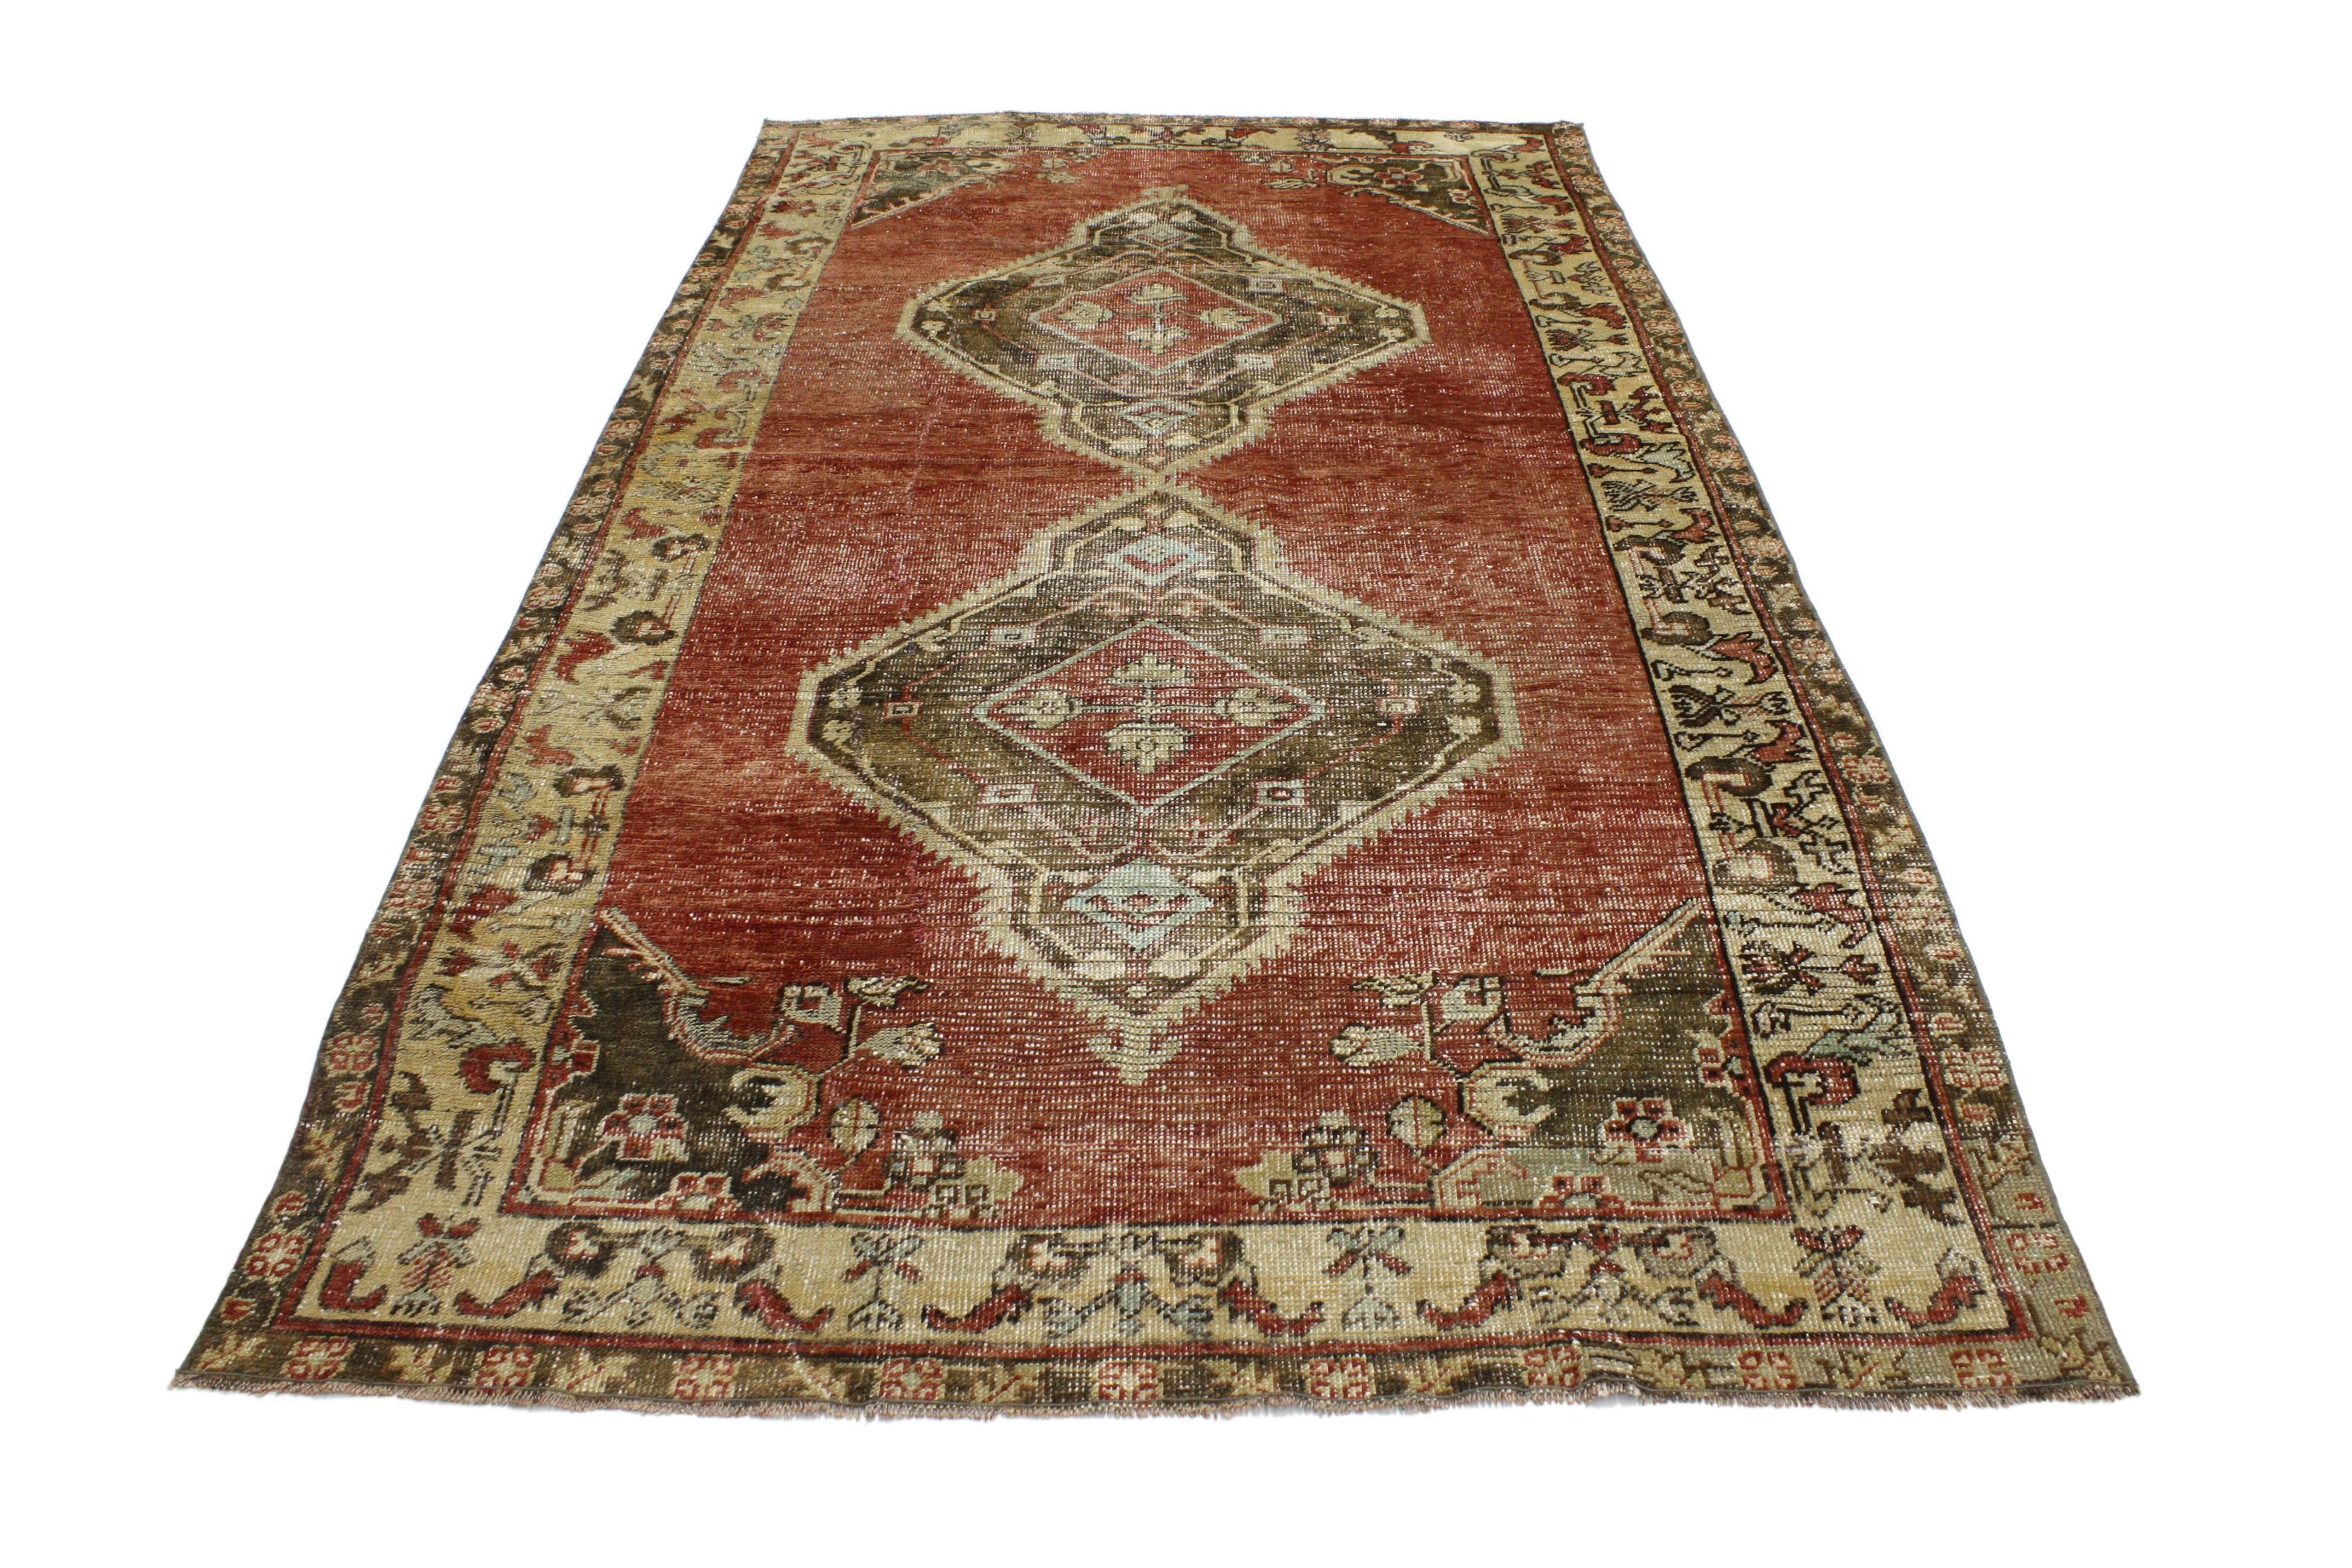 52041 Vintage Turkish Oushak rug with rustic modern design. Vintage hand-knotted Turkish Oushak rug with traditional modern style featuring a double medallion and complementary spandrels in an open abrashed field surrounded by a geometric border.